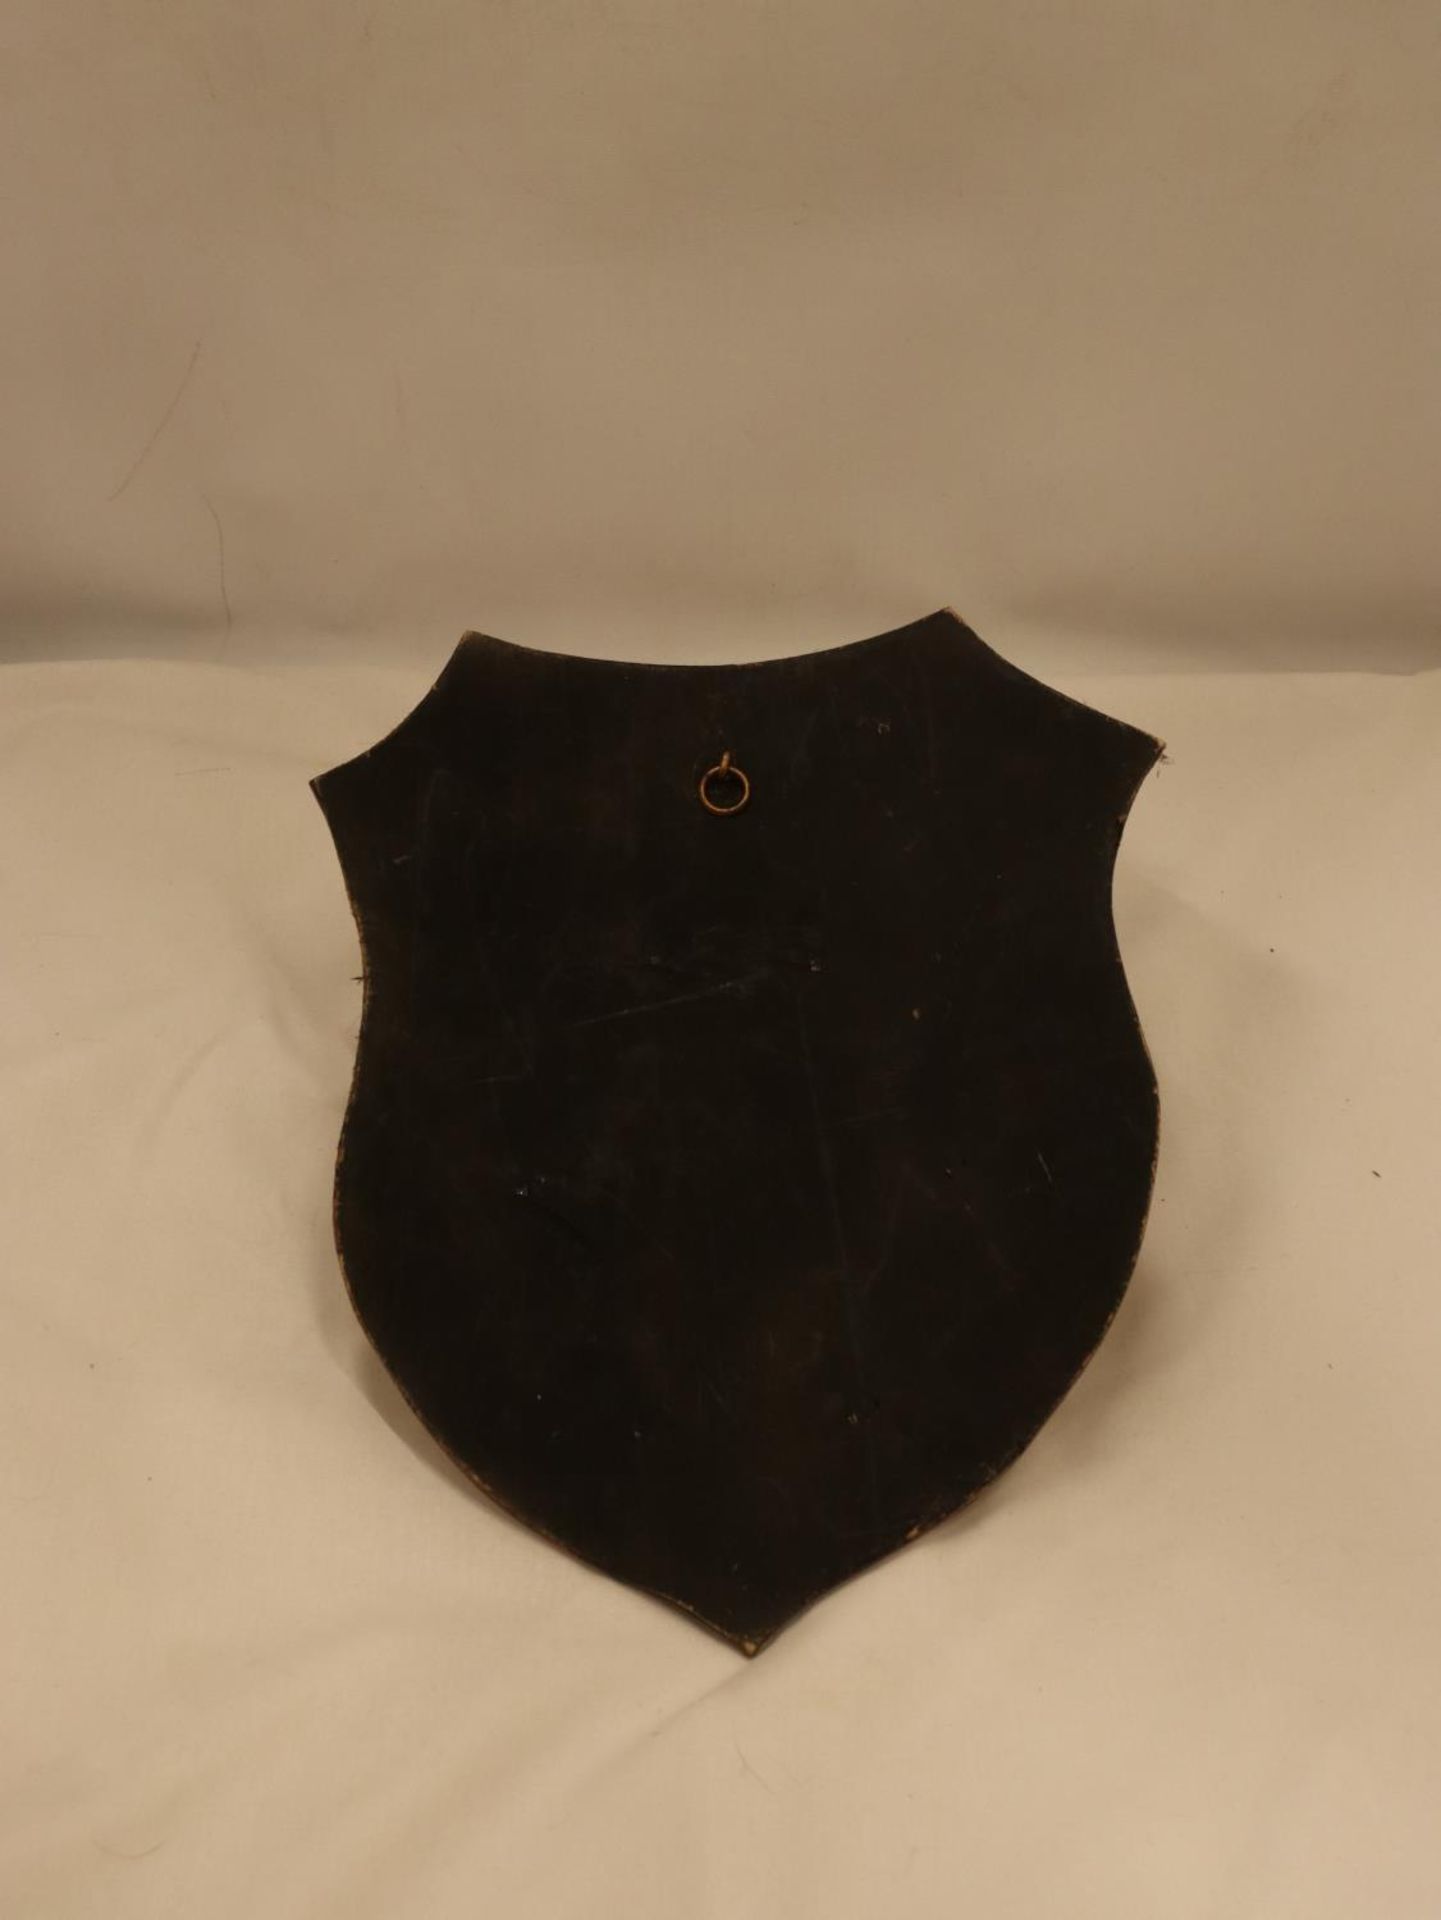 A PART OF A SKULL WITH HORNS AND TEETH ON A WOODEN SHIELD SHAPED PLAQUE - Image 3 of 4